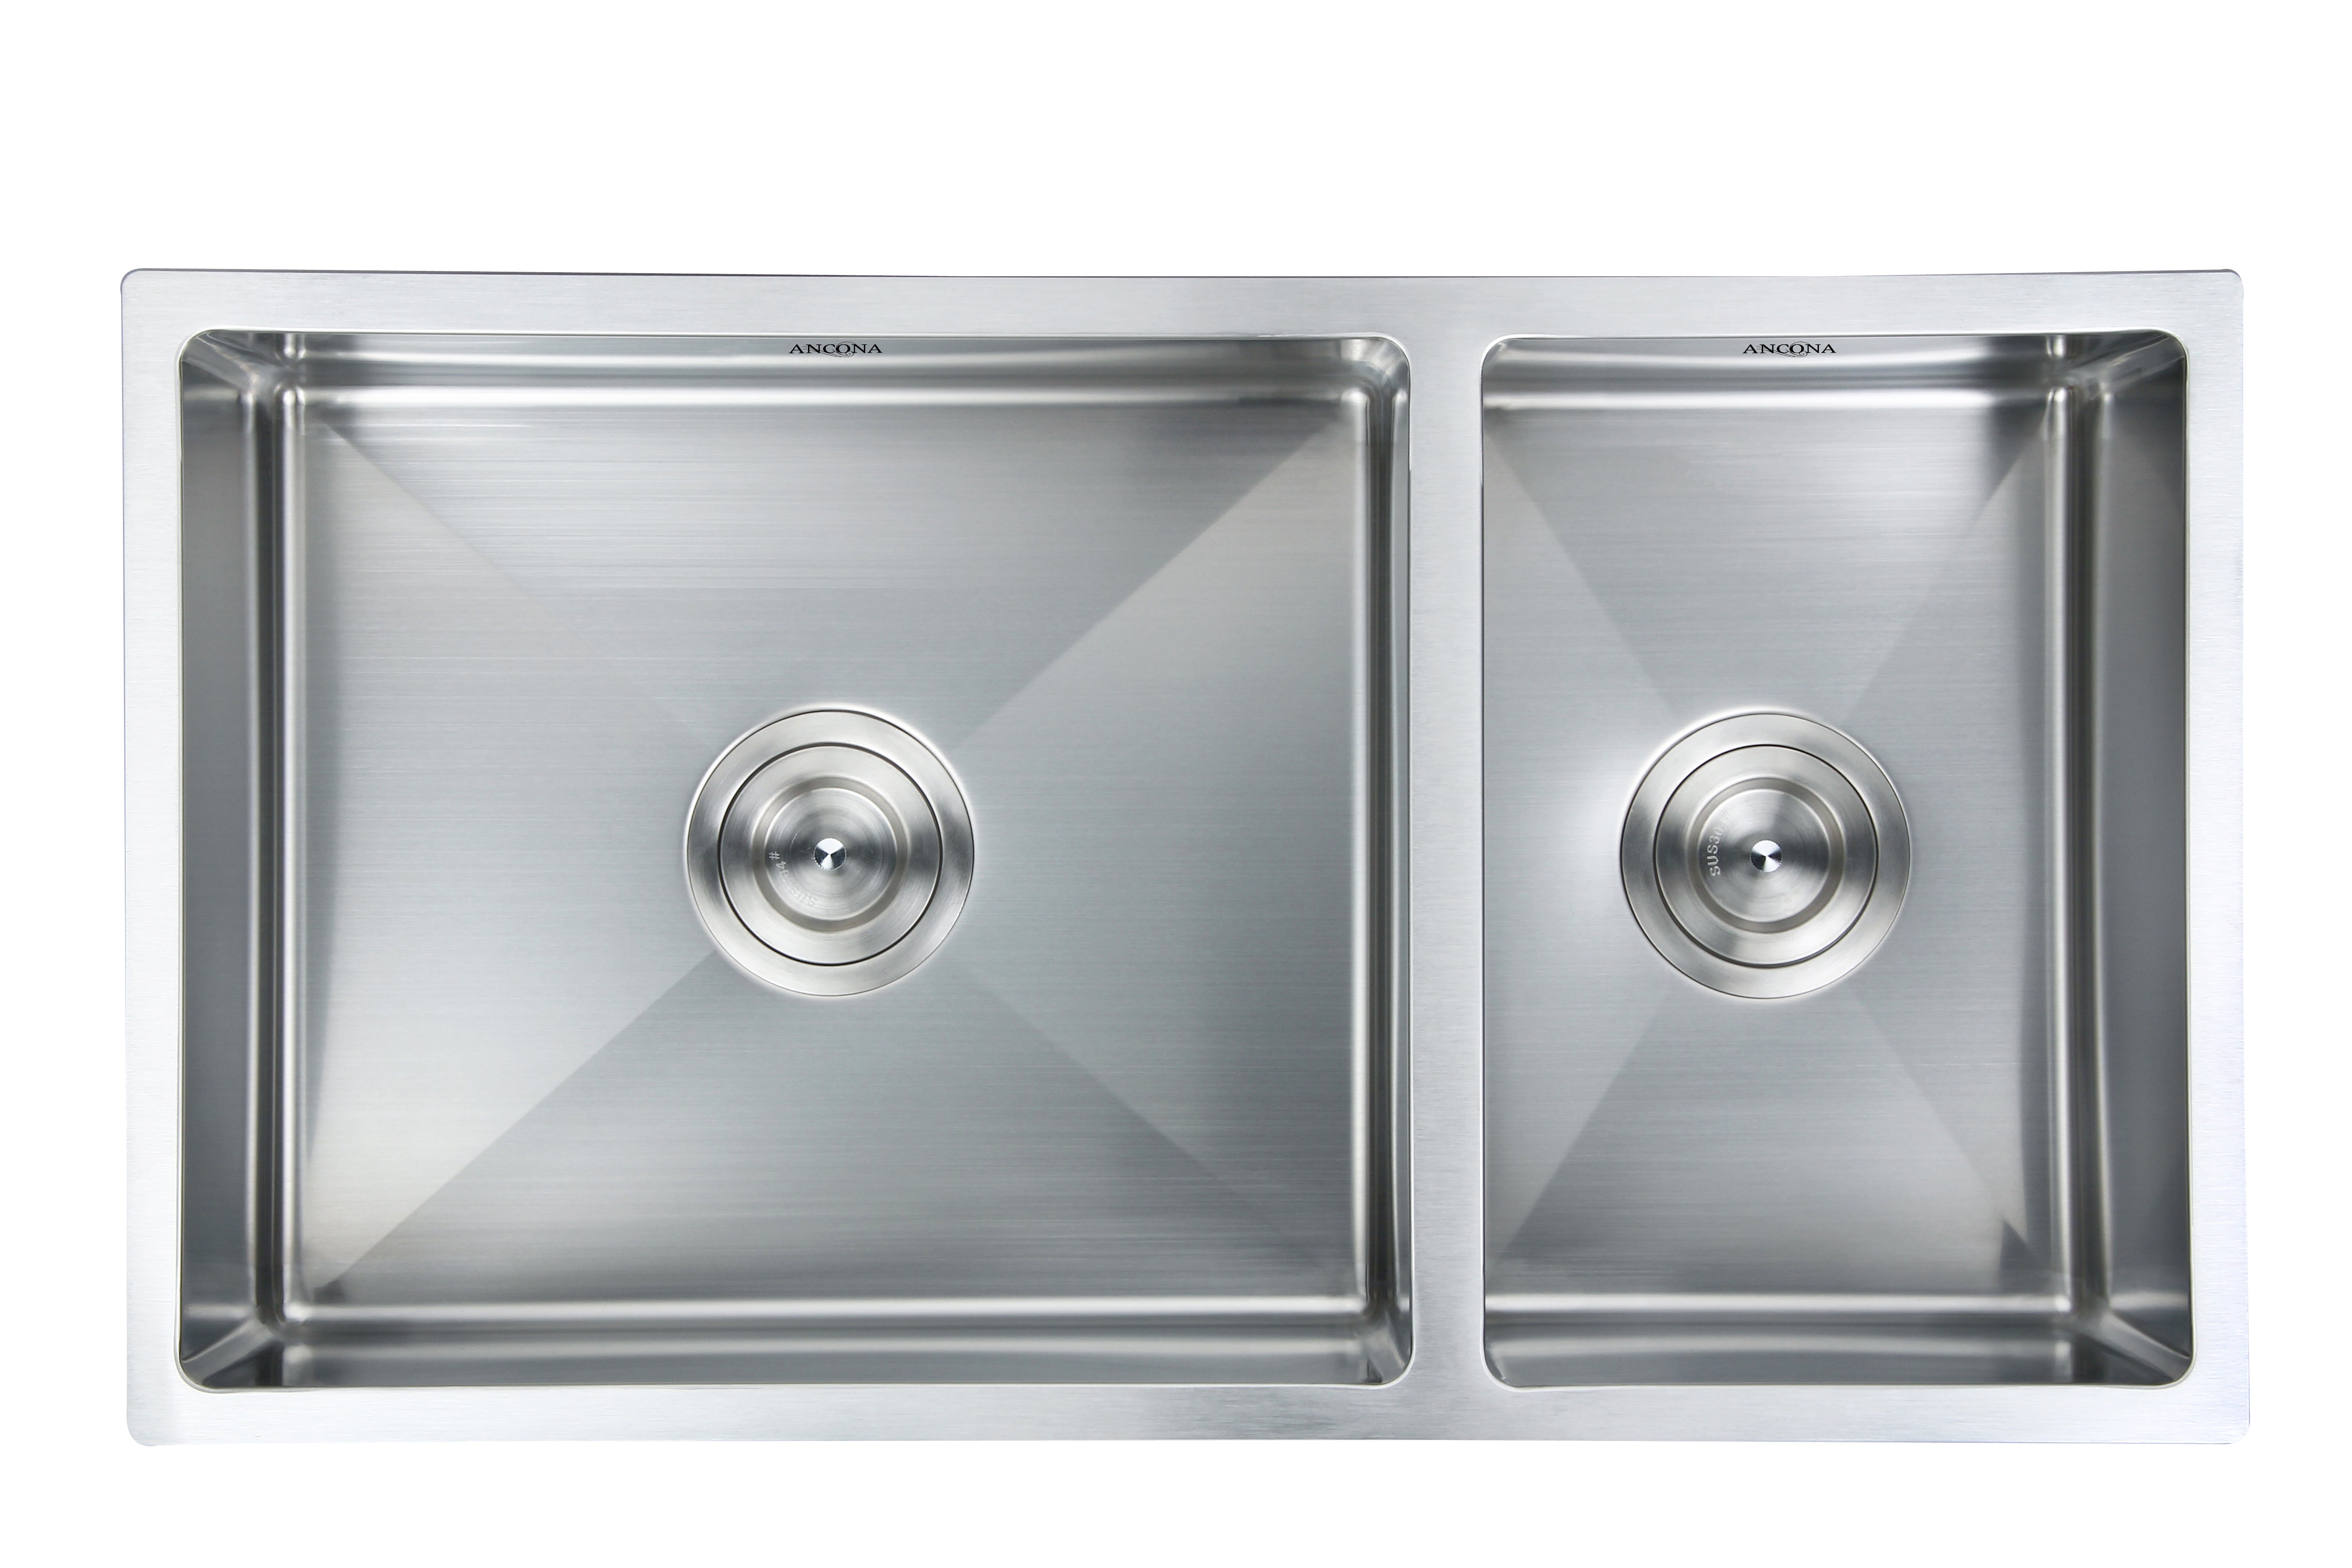 Prestige Series Undermount Stainless Steel 32 in. 70/30 Double Bowl Kitchen Sink in Satin Finish with Grids and Strainers